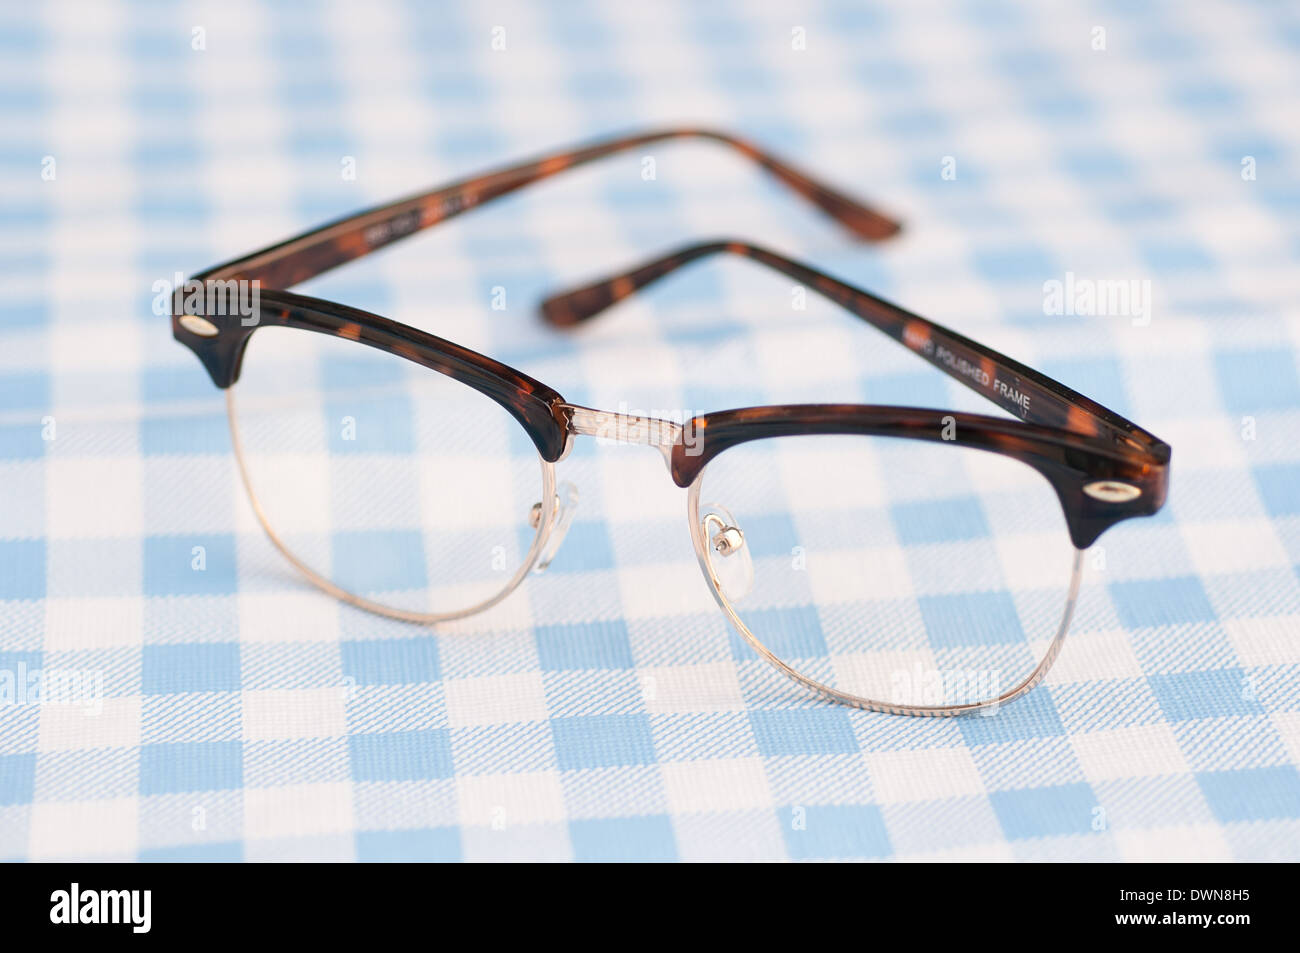 vintage 1950s style eye glasses on a blue gingham table cloth, retro accessory concept Stock Photo